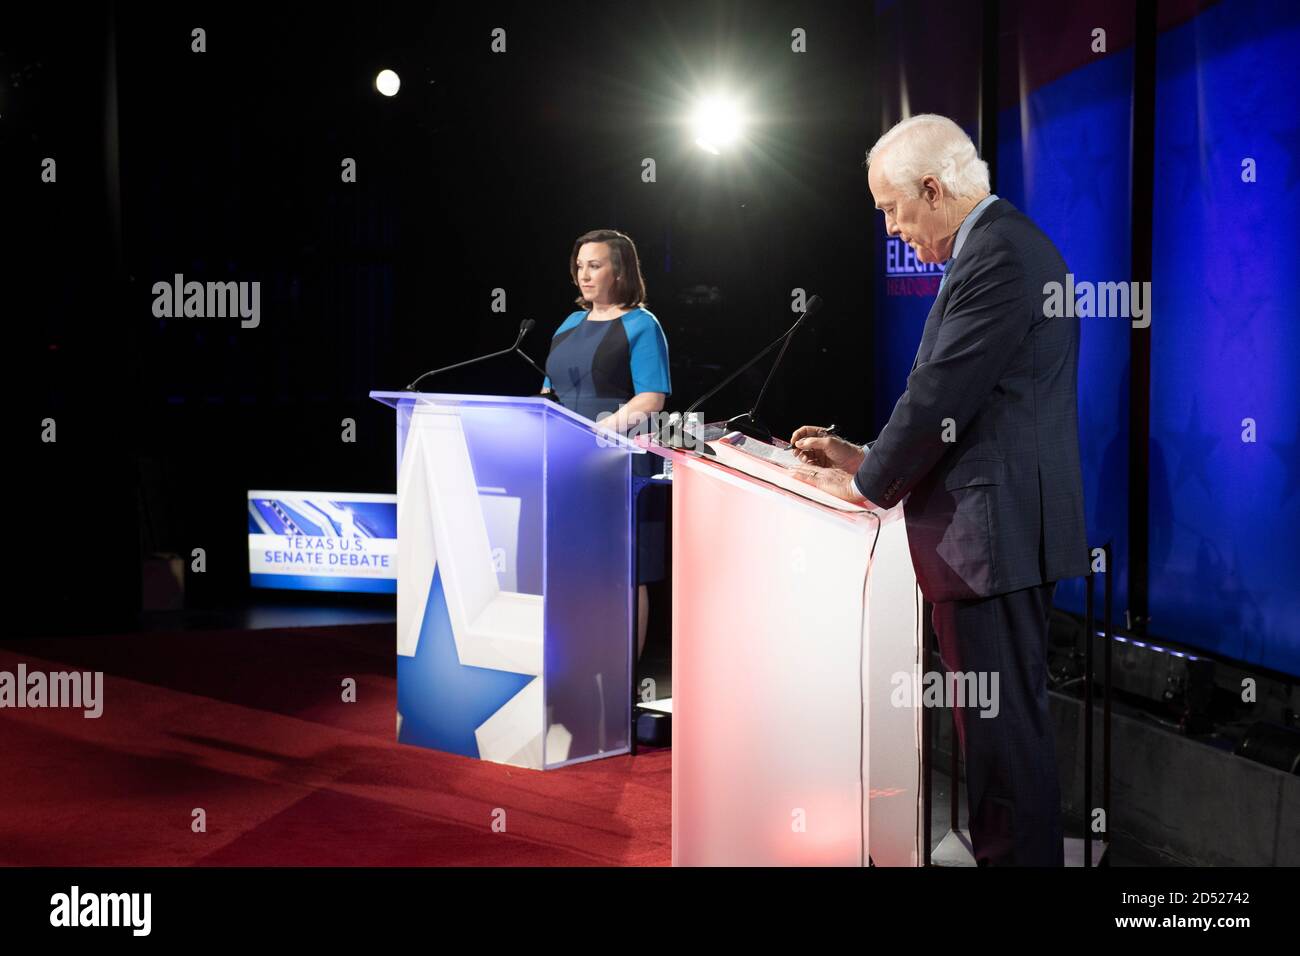 Austin TX USA, Oct. 9 2020: Democratic challenger MJ Hegar (l) answers a question while debating three-term U.S. Senator John Cornyn. The 44-year old decorated war veteran is attempting to unseat Cornyn, a Republican stalwart. Hegar has outspent Cornyn as the two are locked in a tight race three weeks before Election Day. Stock Photo